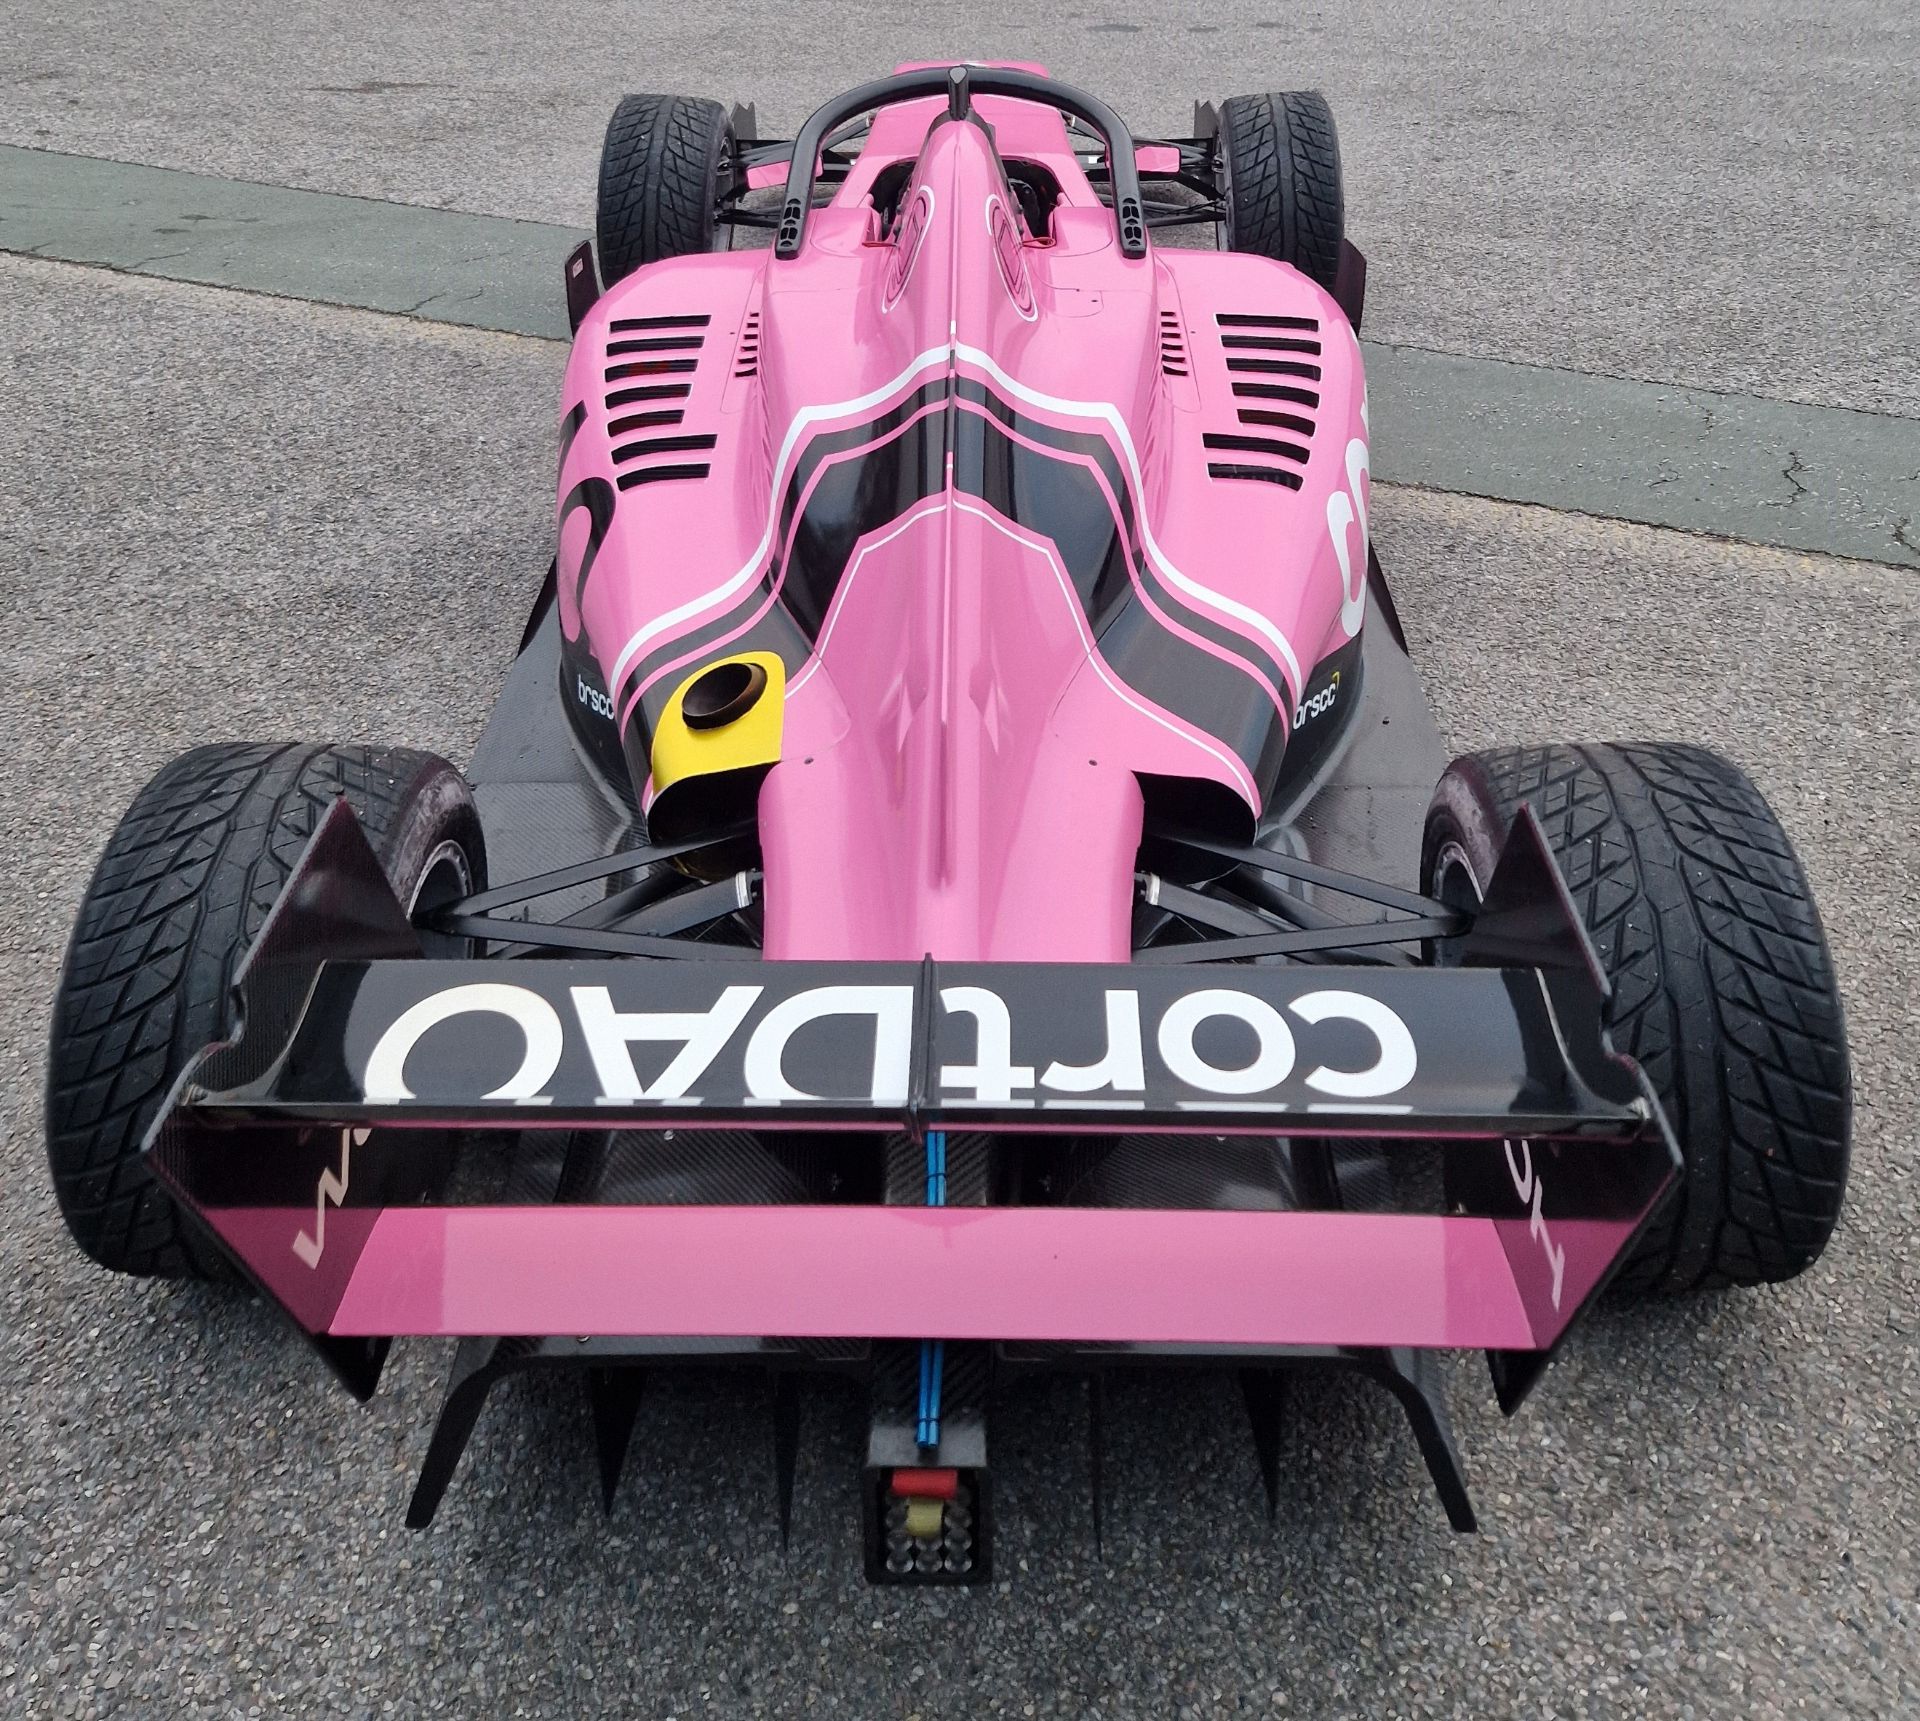 One TATUUS F3 T-318 Alfa Romeo Race Car Chassis No. 082 (2019) Finished in cortDAO Livery as - Image 4 of 10